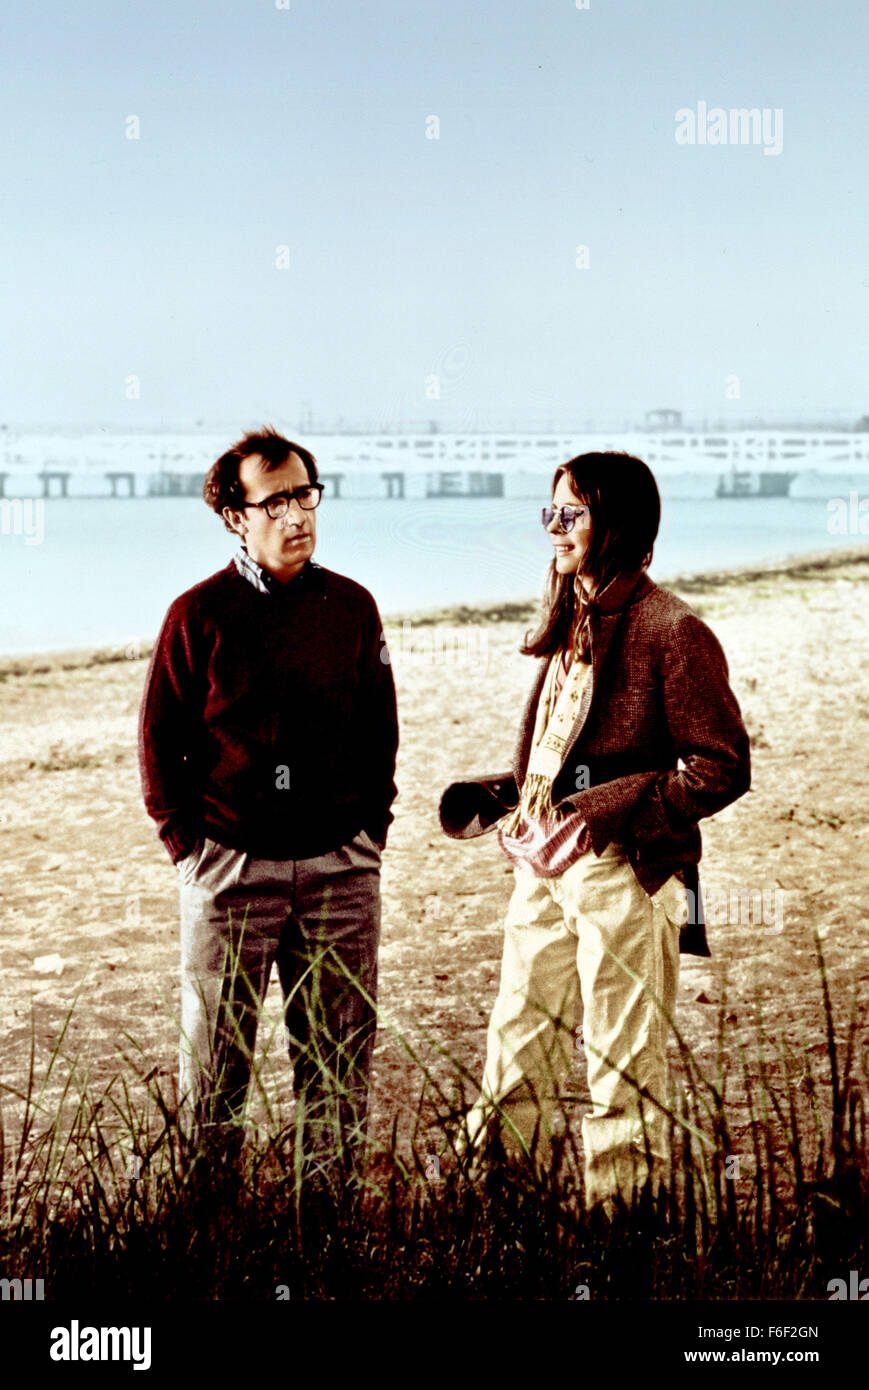 Film Title:  ANNIE HALL.  DIRECTOR:  Woody Allen.  STUDIO: UNITED ARTISTS  PLOT:    After breaking up with his girlfriend Annie Hall (Diane Keaton), neurotic comedian Alvy Singer (Woody Allen) goes on a stream of conciousness journey through his memories of their relationship, trying to find out what caused them to part ways. The film features innovative elements including cartoon segments, flashbacks, and even breaking the 'fourth wall' by having characters address the camera.  The  film marks the fourth pairing of Keaton and Allen, who were also an off-screen couple at the time.  Winner of 4 Stock Photo